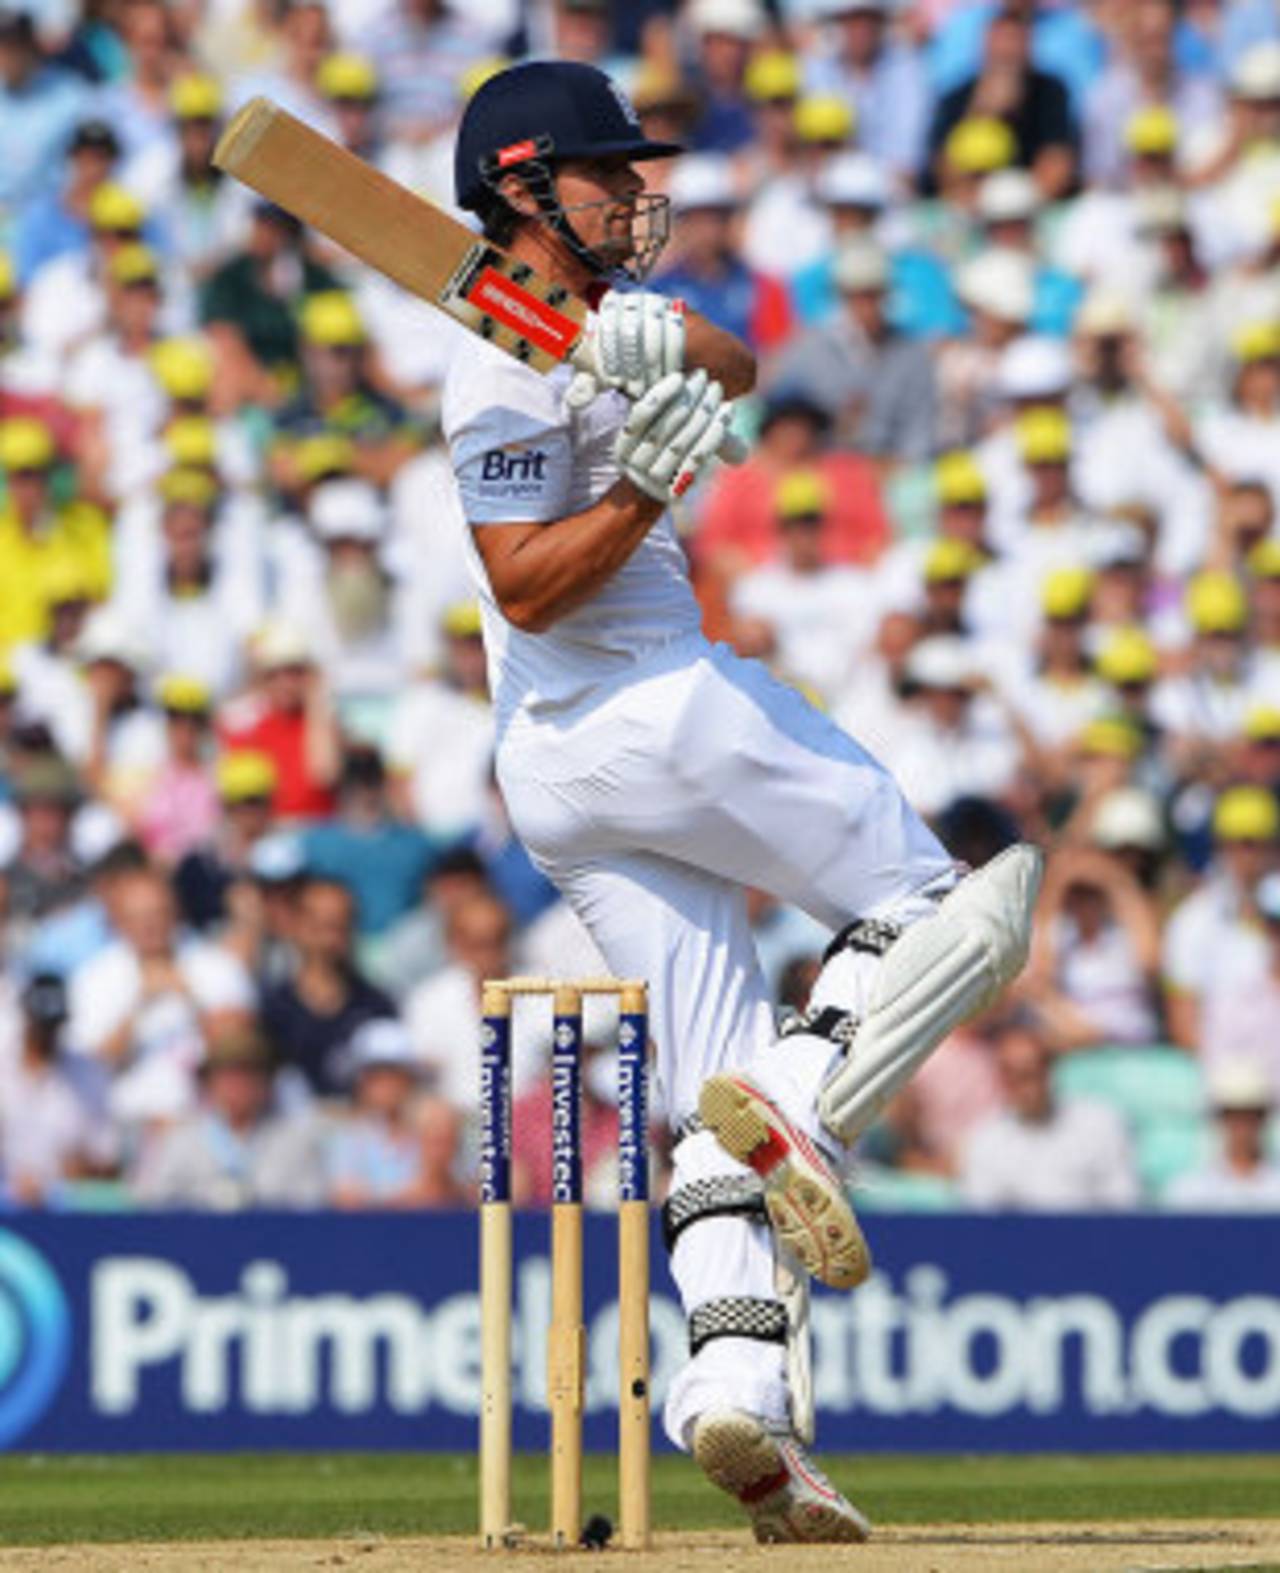 Alastair Cook pulls on the third morning, England v Australia, 5th Investec Test, The Oval, 3rd day, August 23, 2013